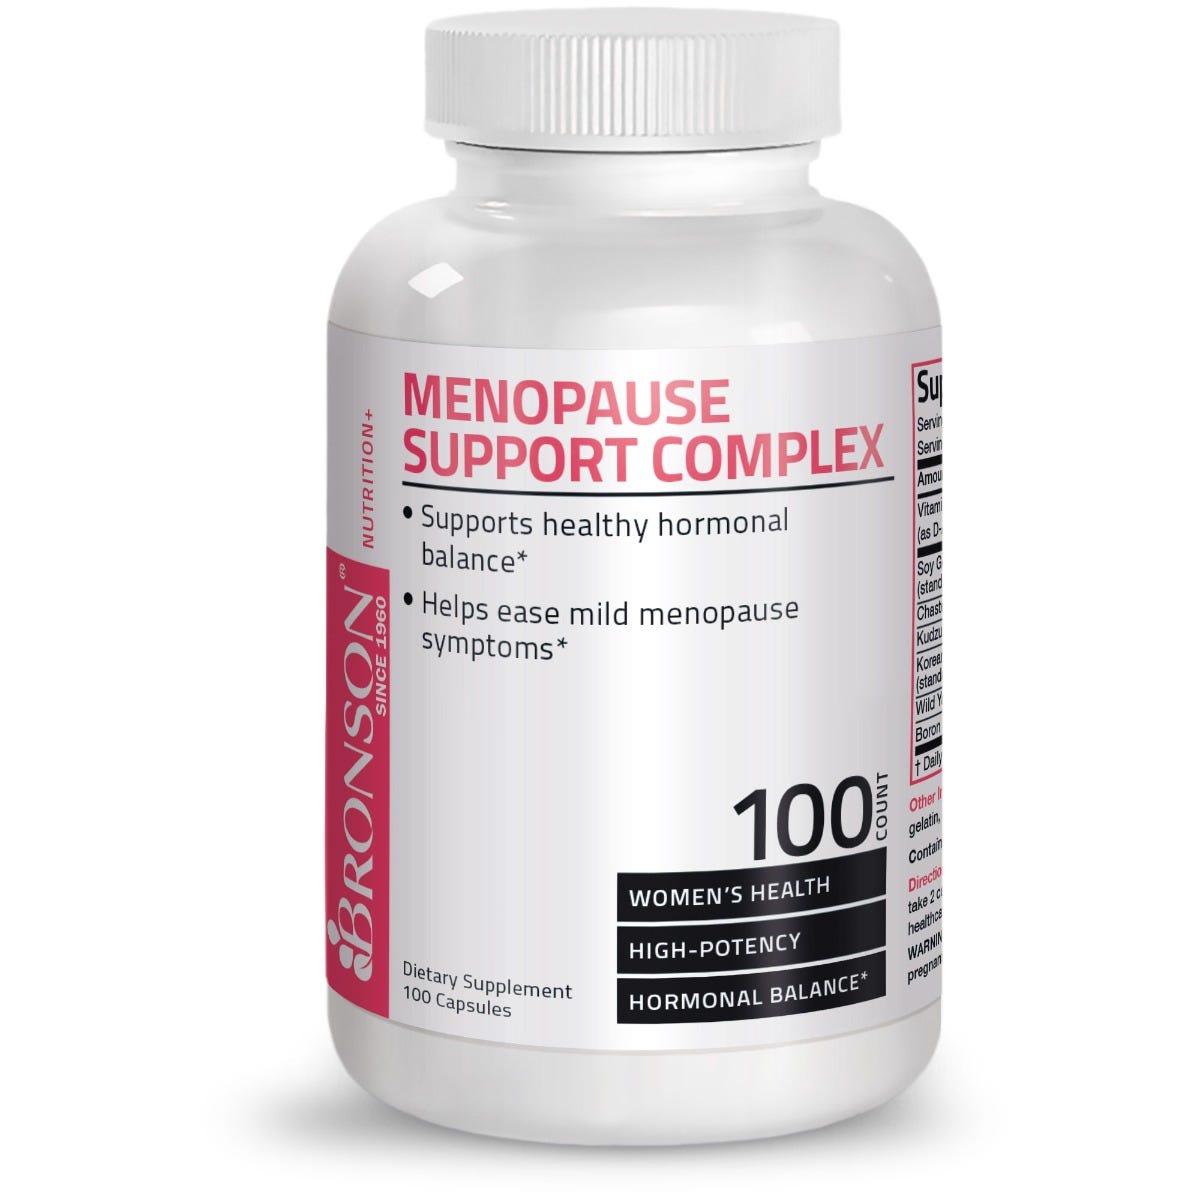 Menopause Support Phyto-Estrogen Complex - 100 Capsules view 1 of 4